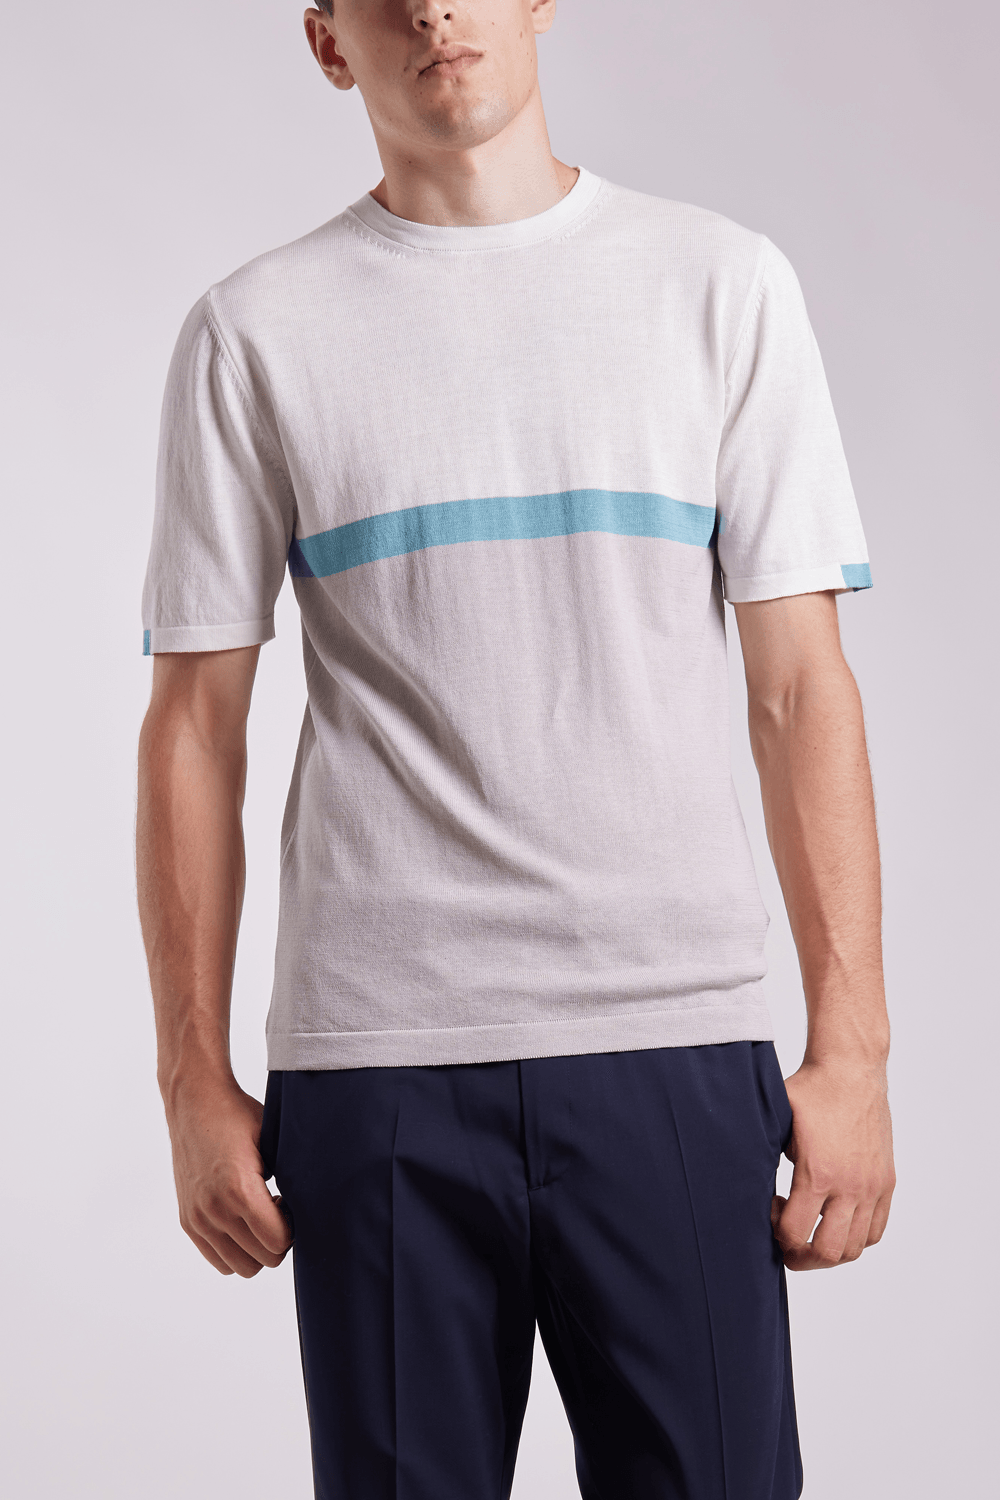 Buy the Daniele Fiesoli 3 Colour Stripes T-Shirt in Beige/Blue at Intro. Spend £50 for free UK delivery. Official stockists. We ship worldwide.